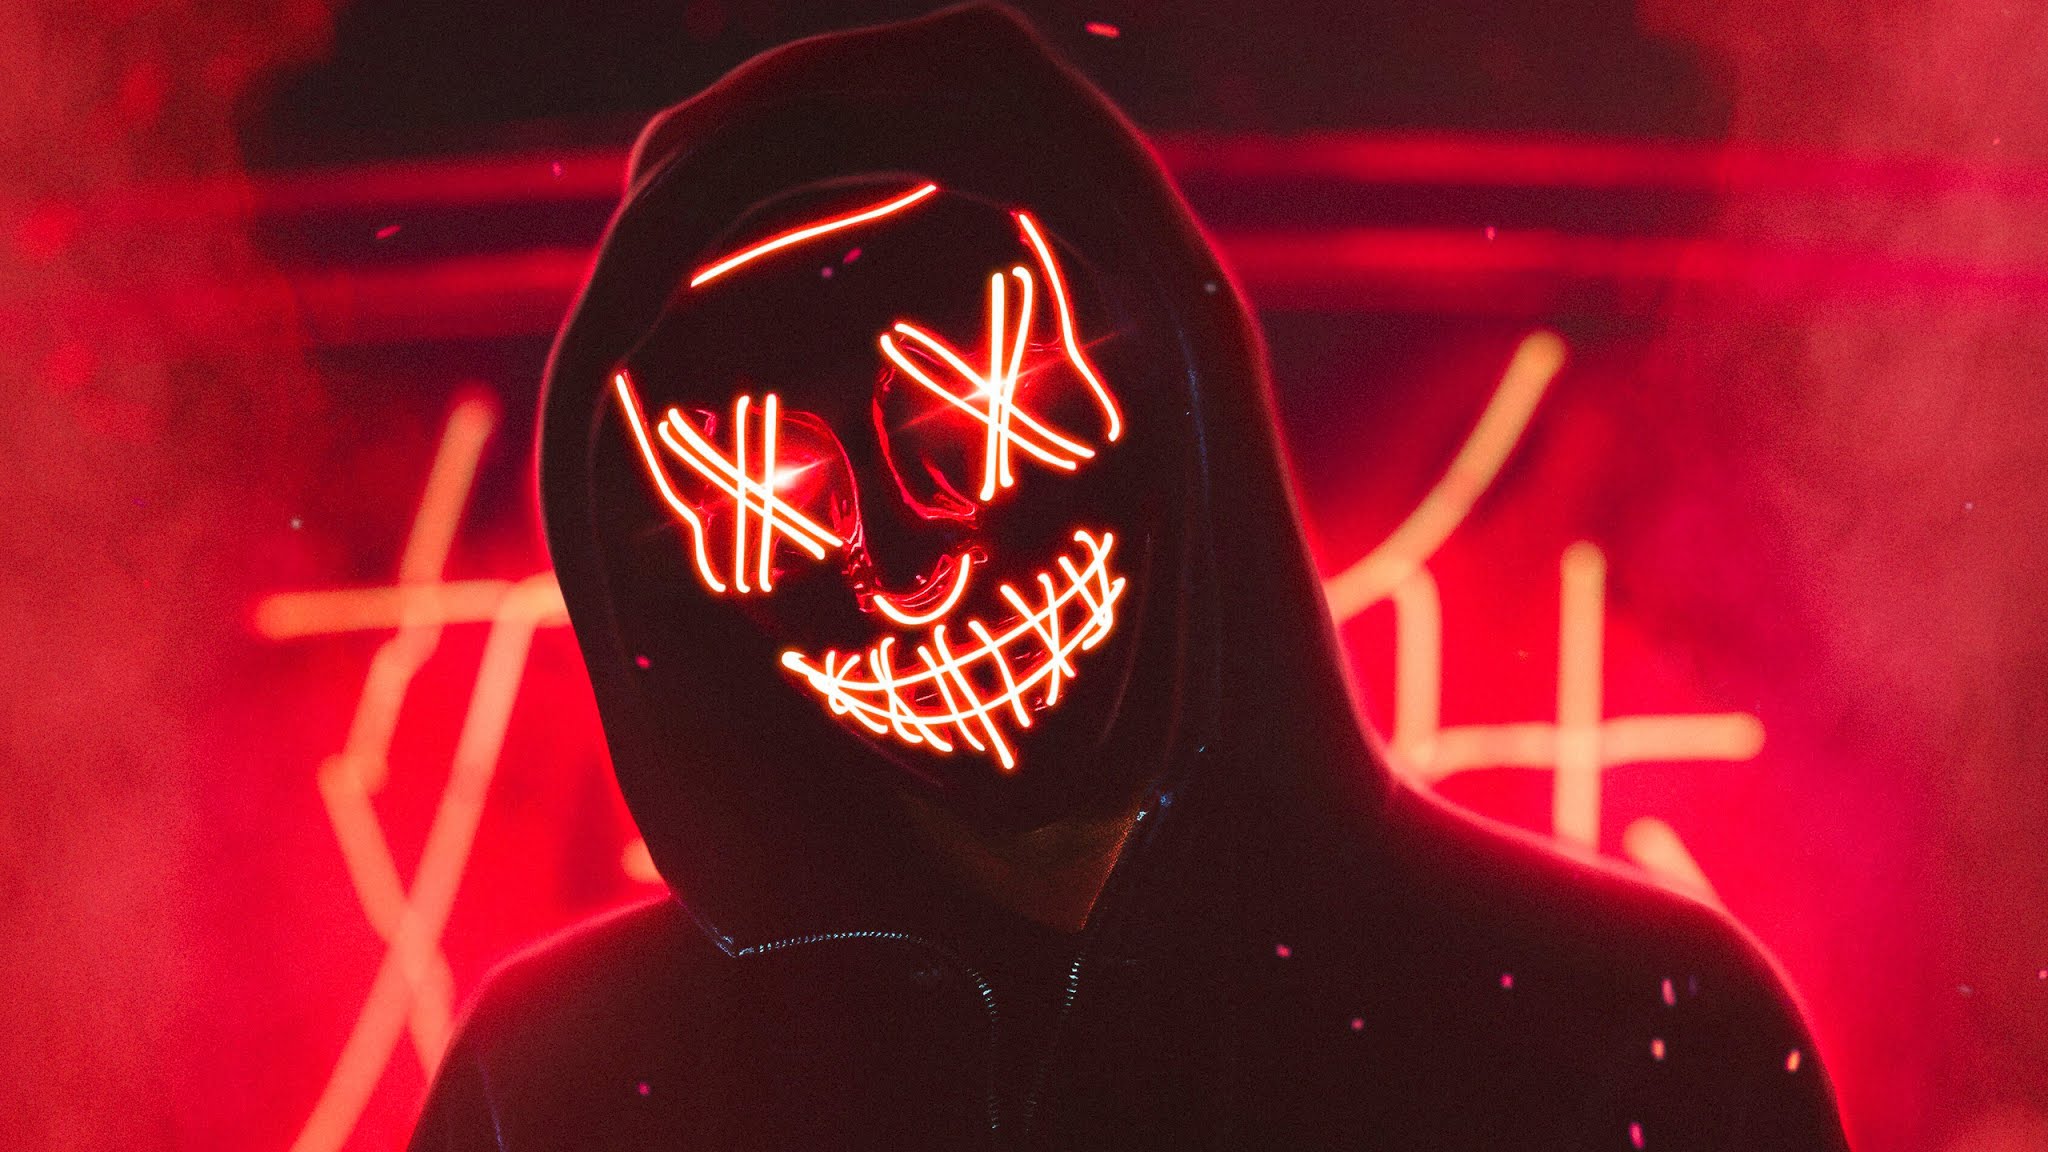 Free Download Neon Mask Guy 4k Xfxwallpapers Hd Wallpapers 2048x1152 For Your Desktop Mobile Tablet Explore 18 Neon Mask Wallpapers Neon Mask Wallpapers Mask Wallpapers Tuxedo Mask Wallpaper Download hd wallpapers for free on unsplash. free download neon mask guy 4k